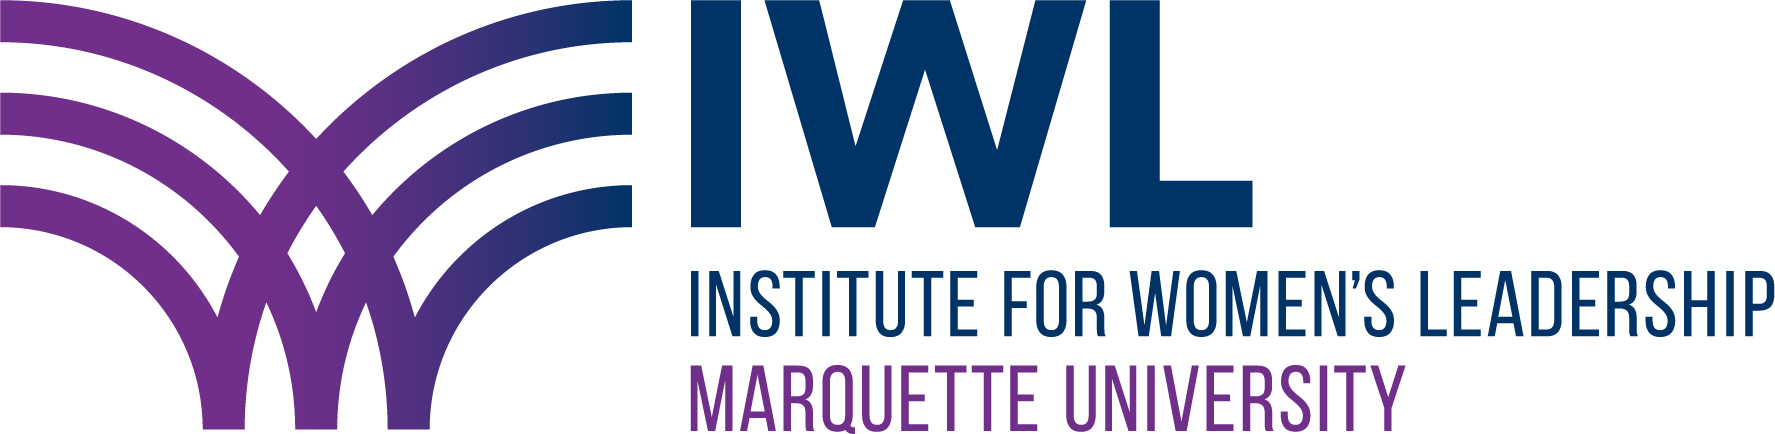 Institute for Women's Leadership at Marquette University